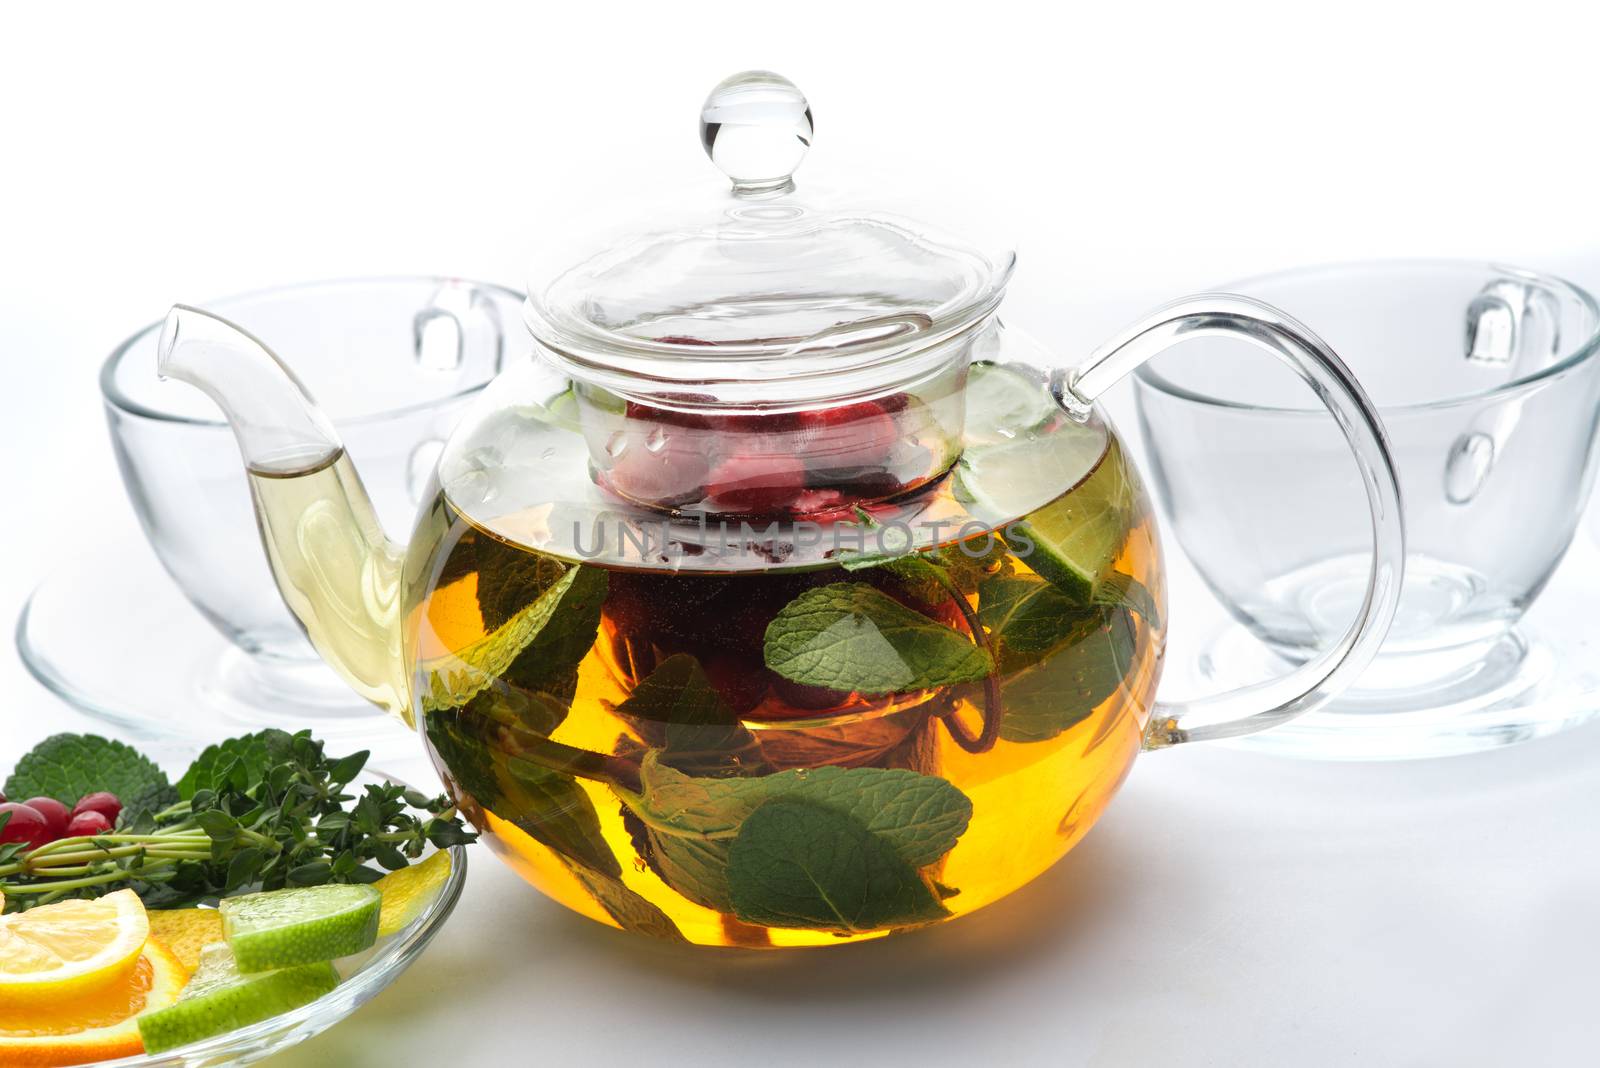 Fruit tea with mint leaves in a teapot on a white background